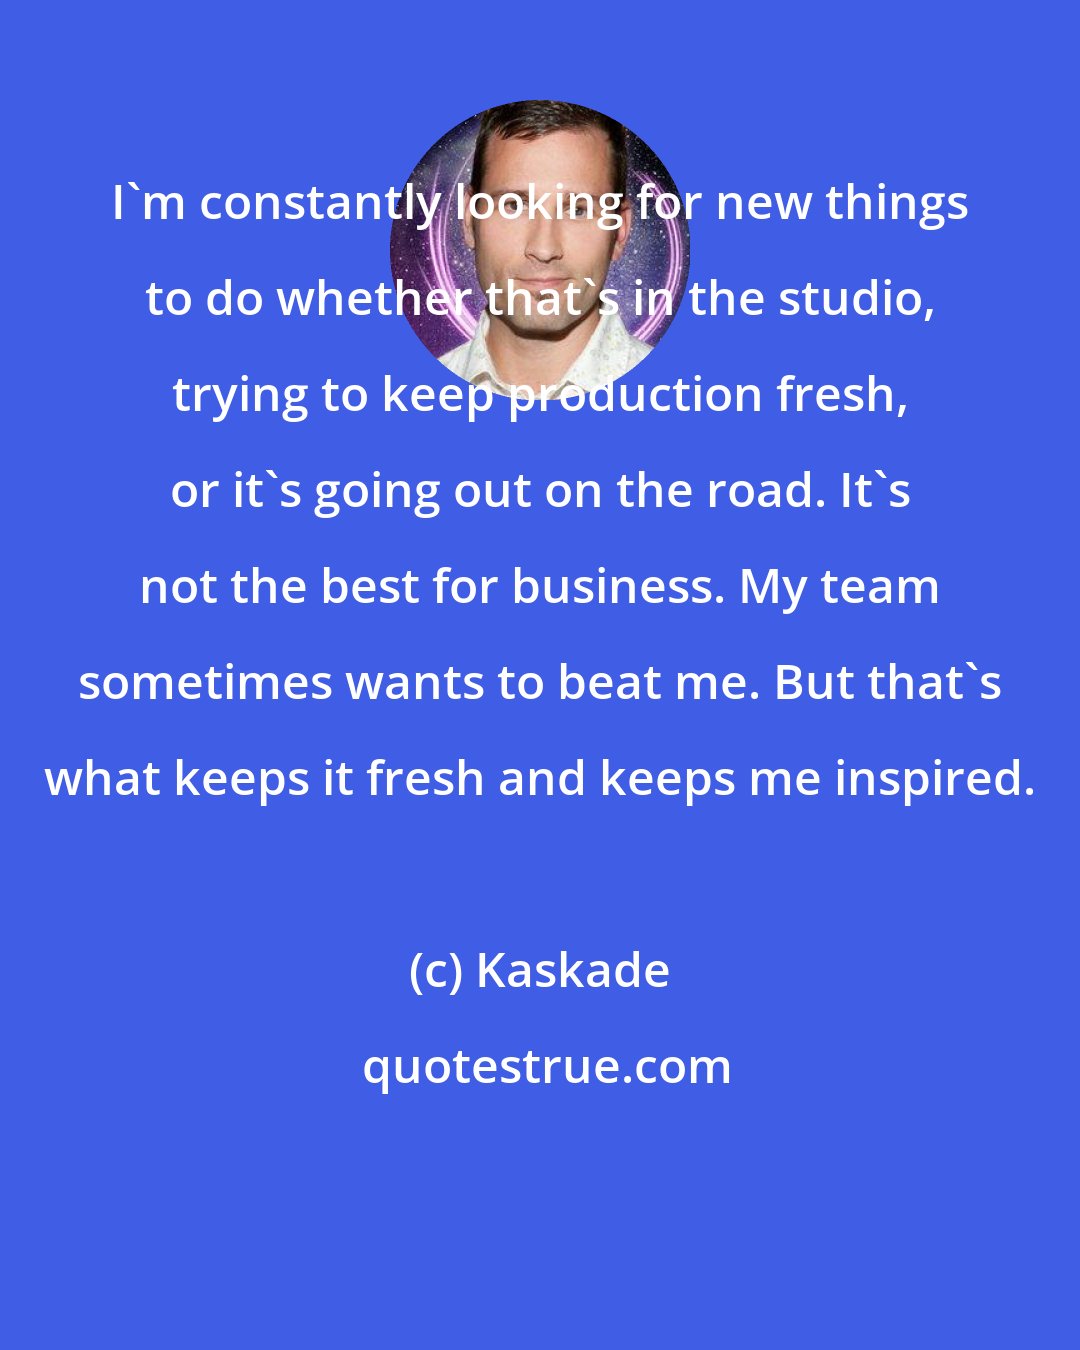 Kaskade: I'm constantly looking for new things to do whether that's in the studio, trying to keep production fresh, or it's going out on the road. It's not the best for business. My team sometimes wants to beat me. But that's what keeps it fresh and keeps me inspired.